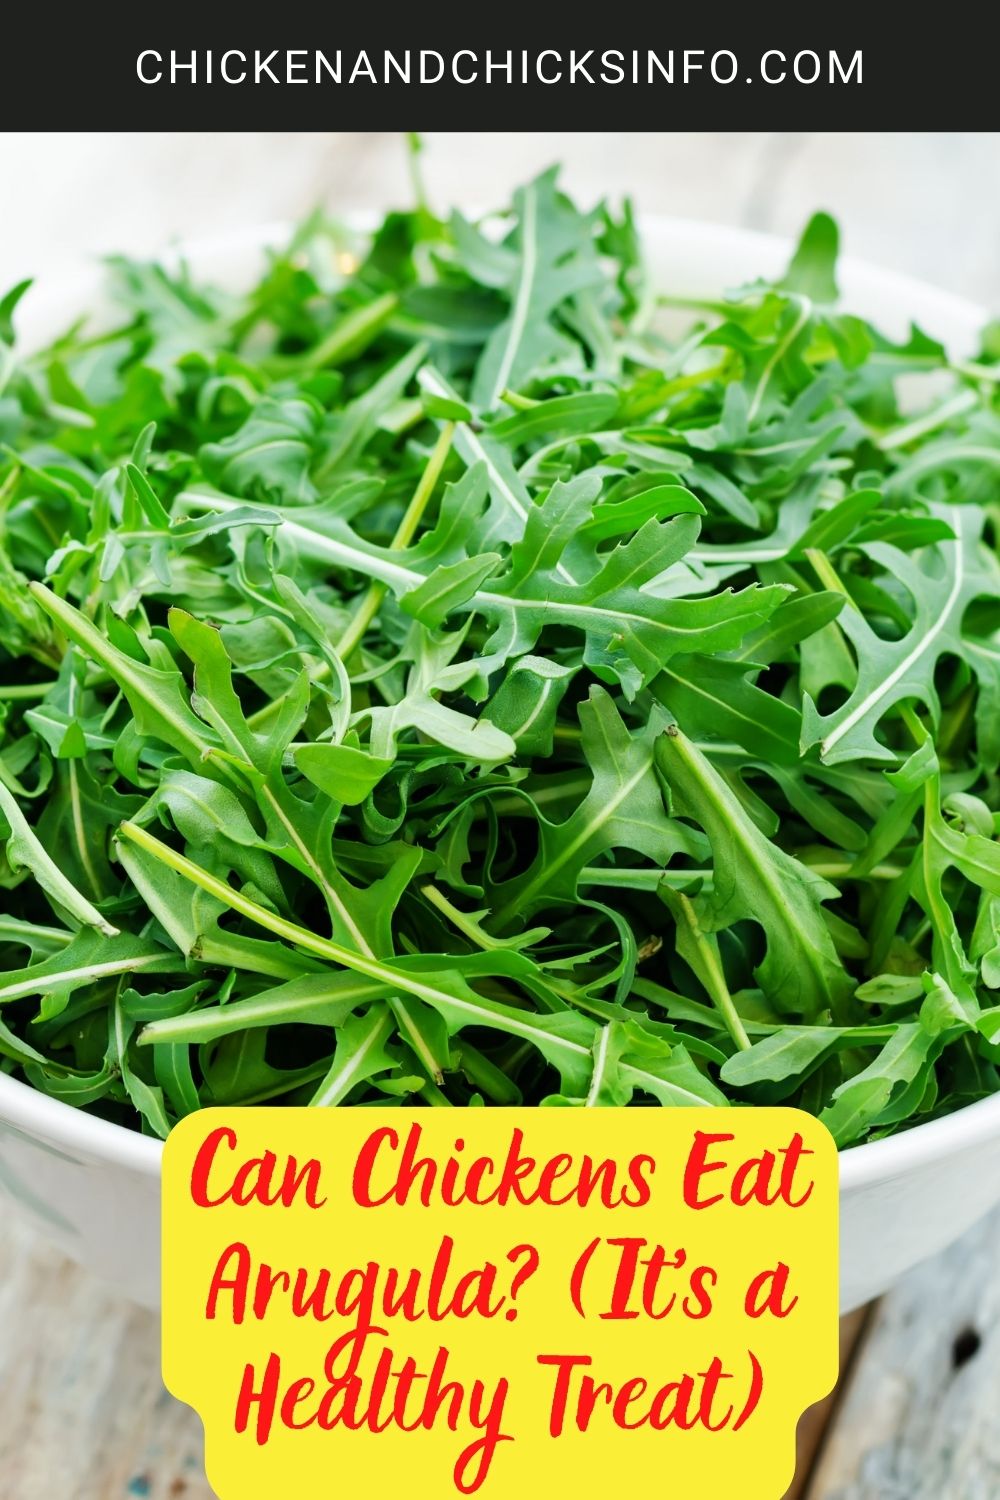 Can Chickens Eat Arugula? (It's a Healthy Treat) poster.
